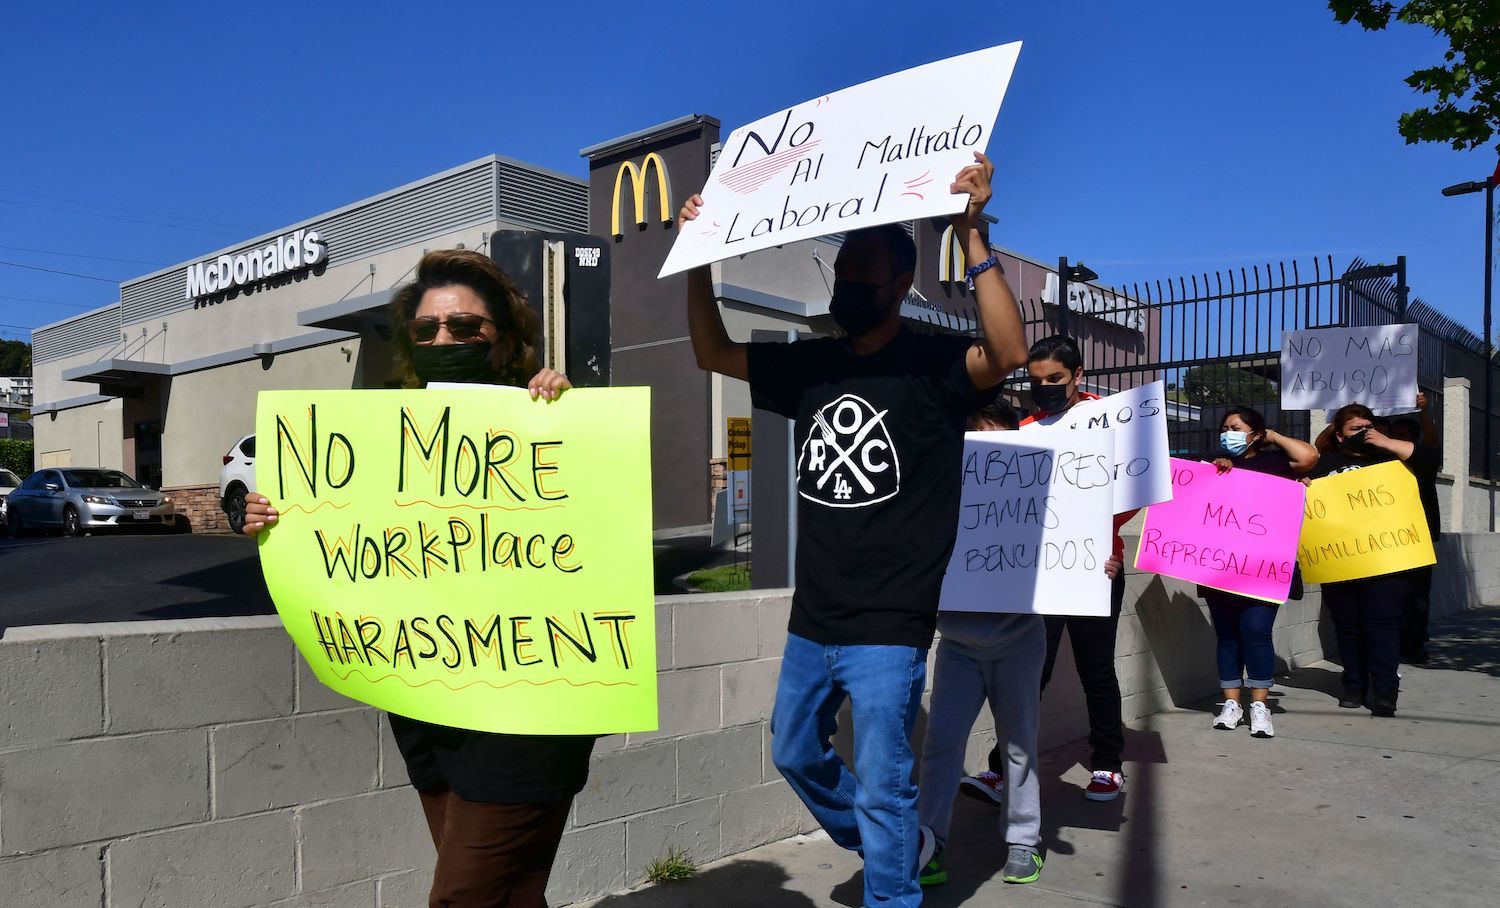 McDonald's employees protest outside their workplace on April 9, 2021 in Los Angeles, to demand an end to what they consider workplace harassment, discrimination and retaliation, despite numerous attempts to reach a resolution with the franchise owners. September 2021